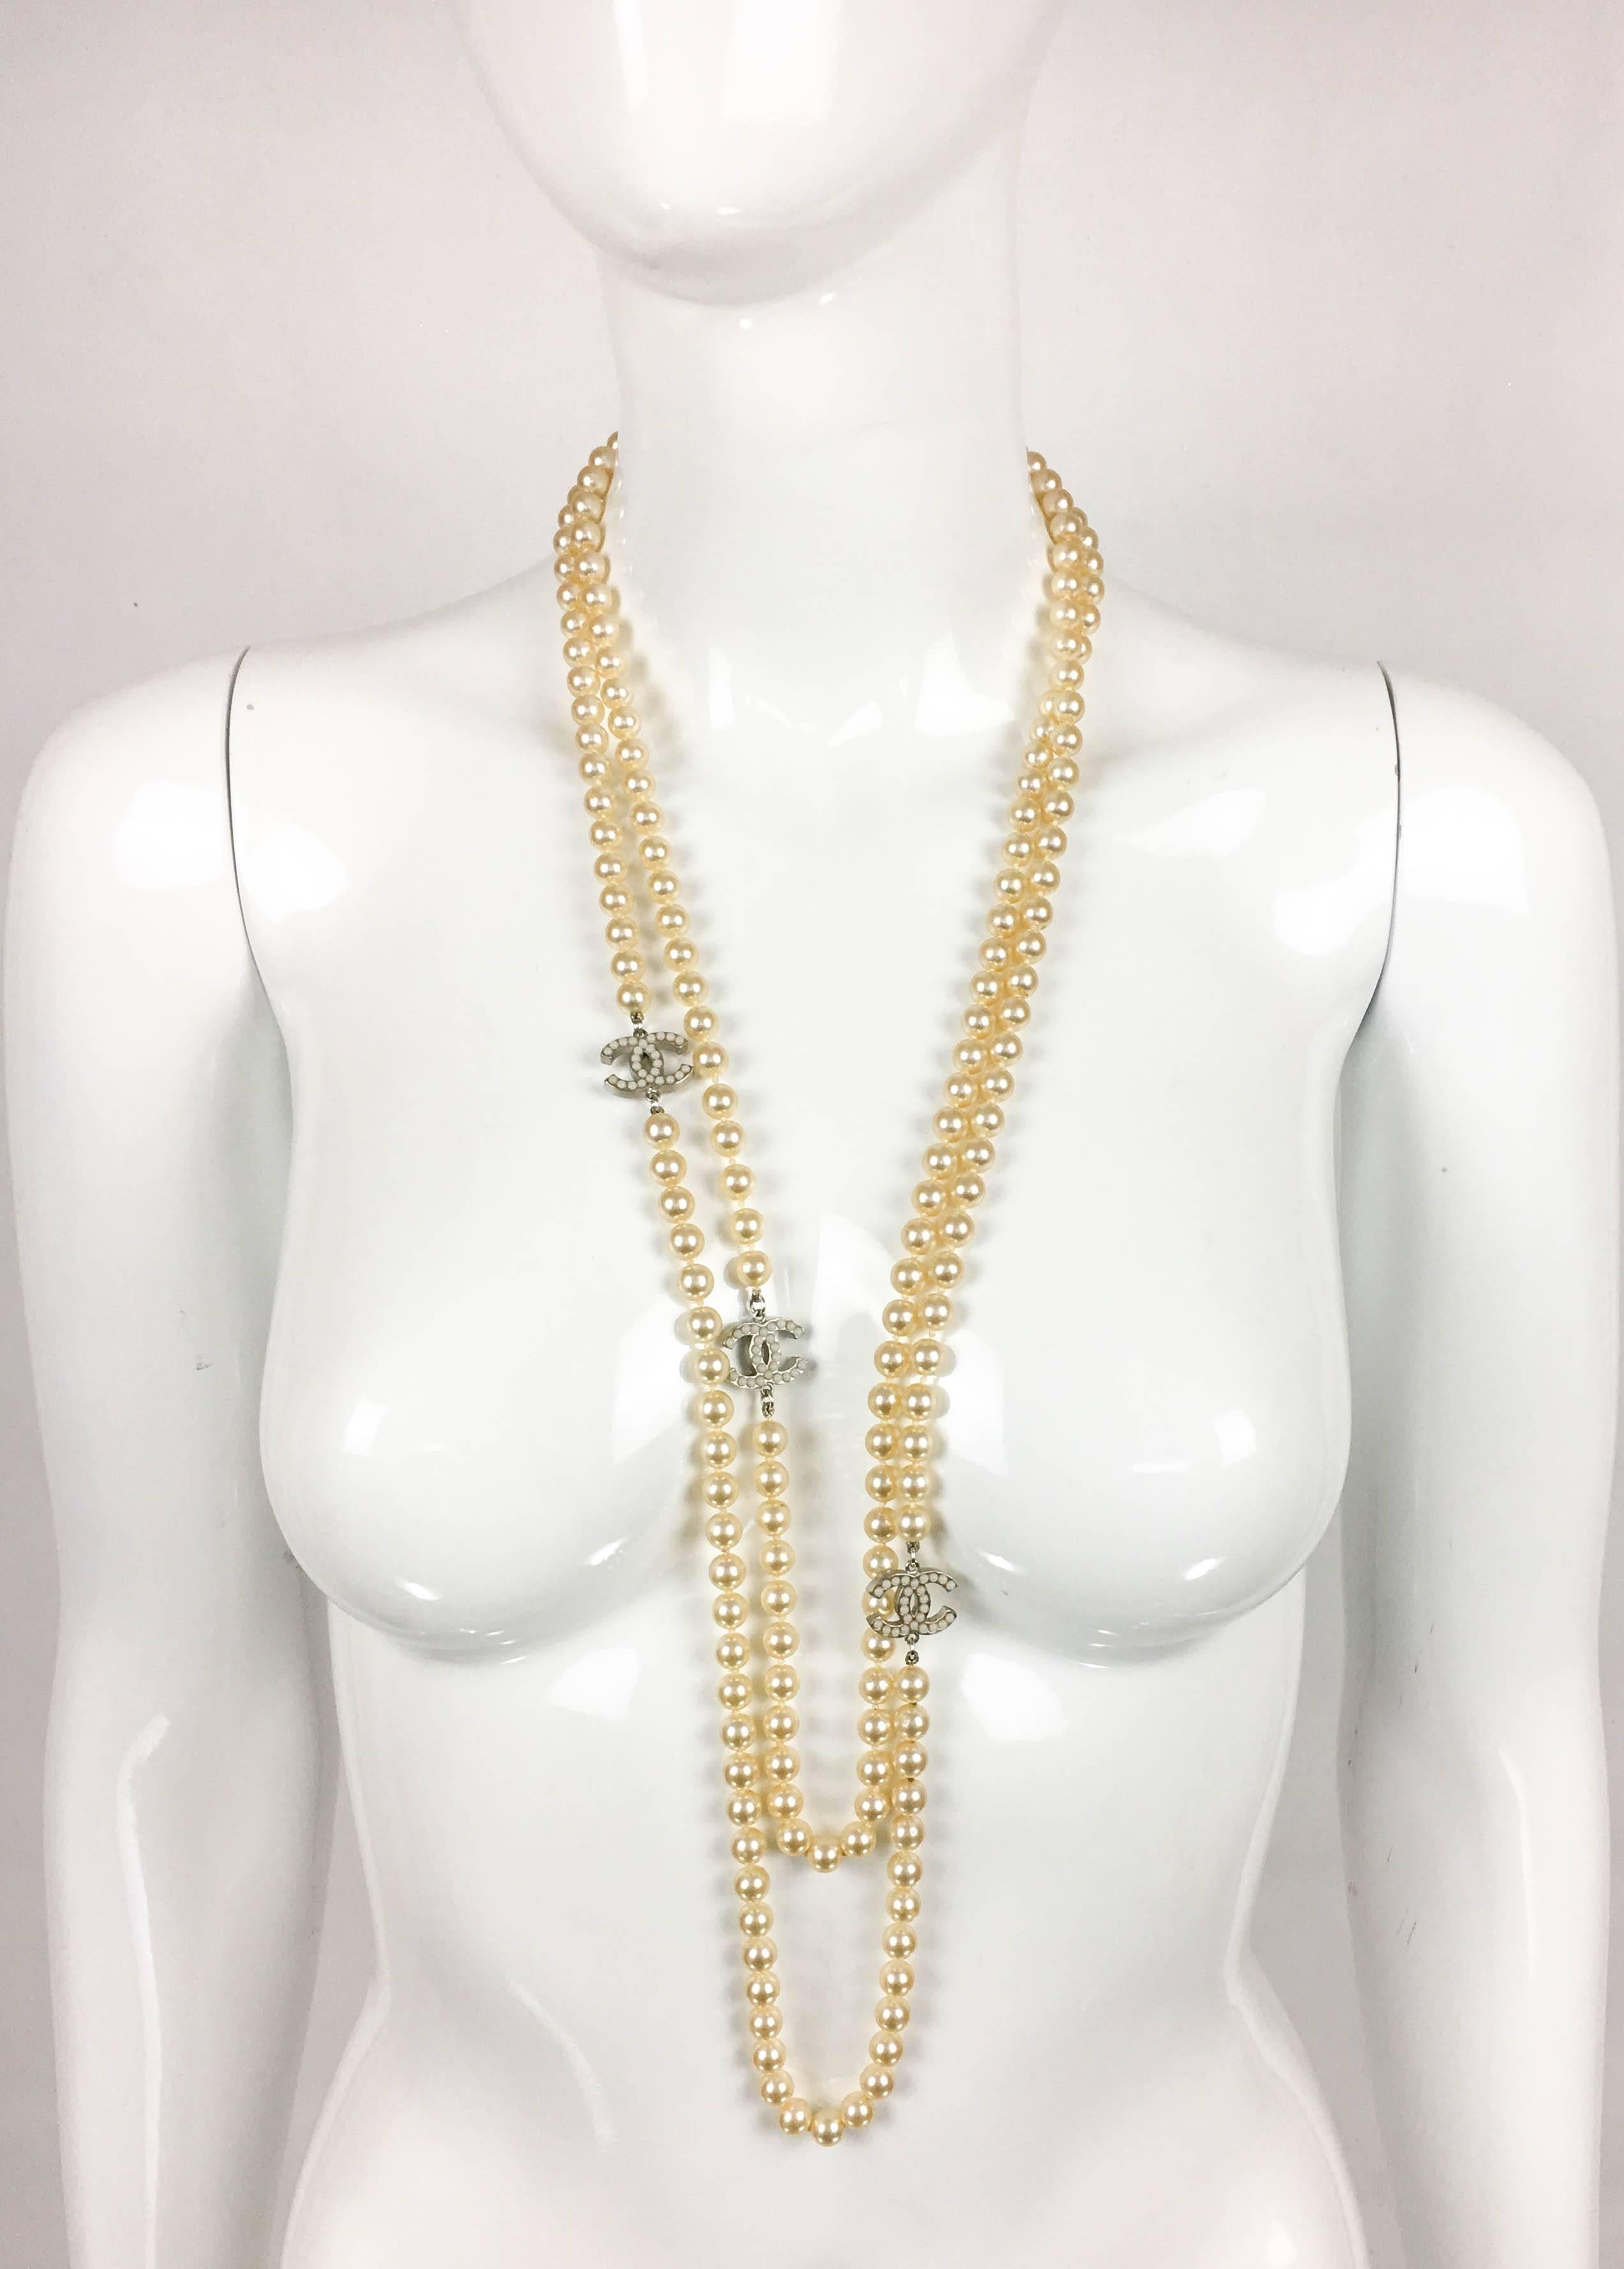 Women's 2008 Chanel Long Pearl Sautoir Necklace with 3 Inset Pearl 'CC' Logos